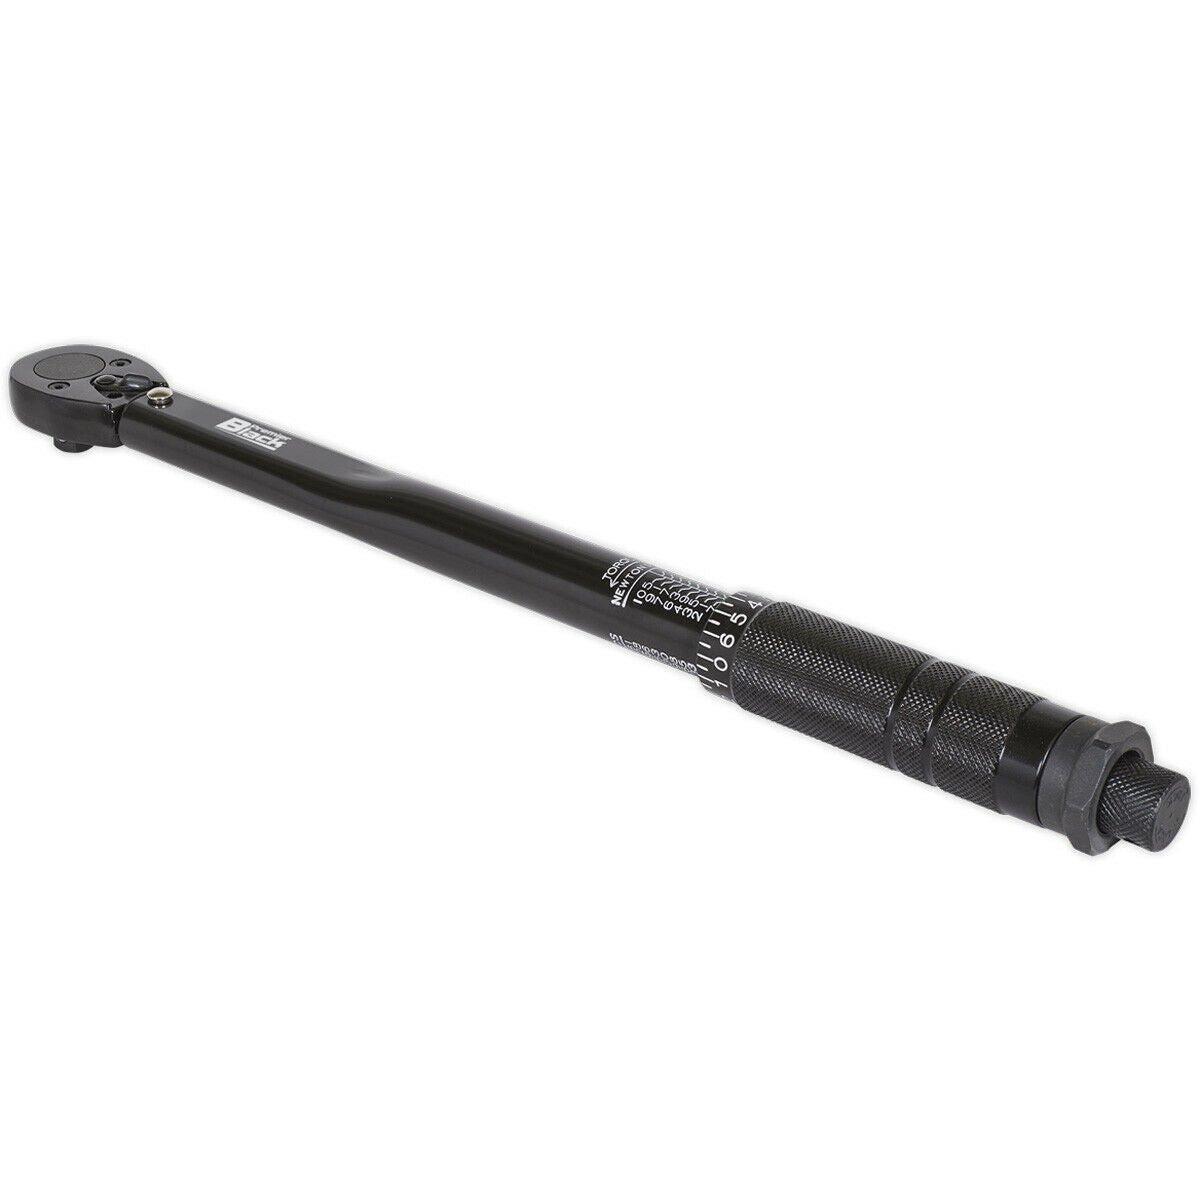 Calibrated Micrometer Torque Wrench - 3/8